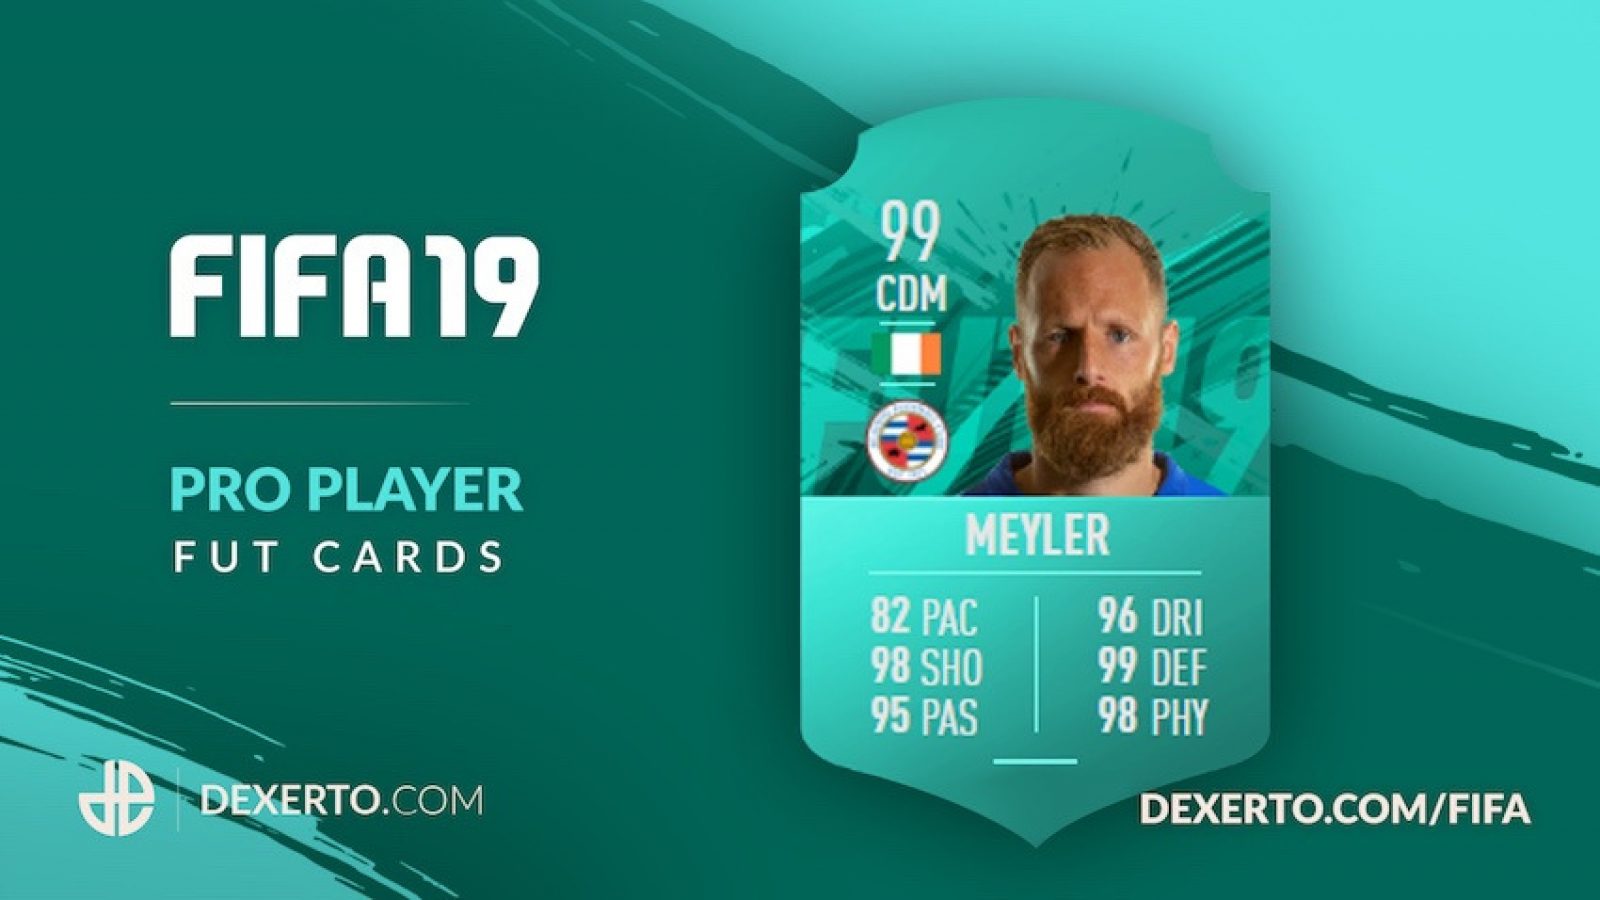 Player card